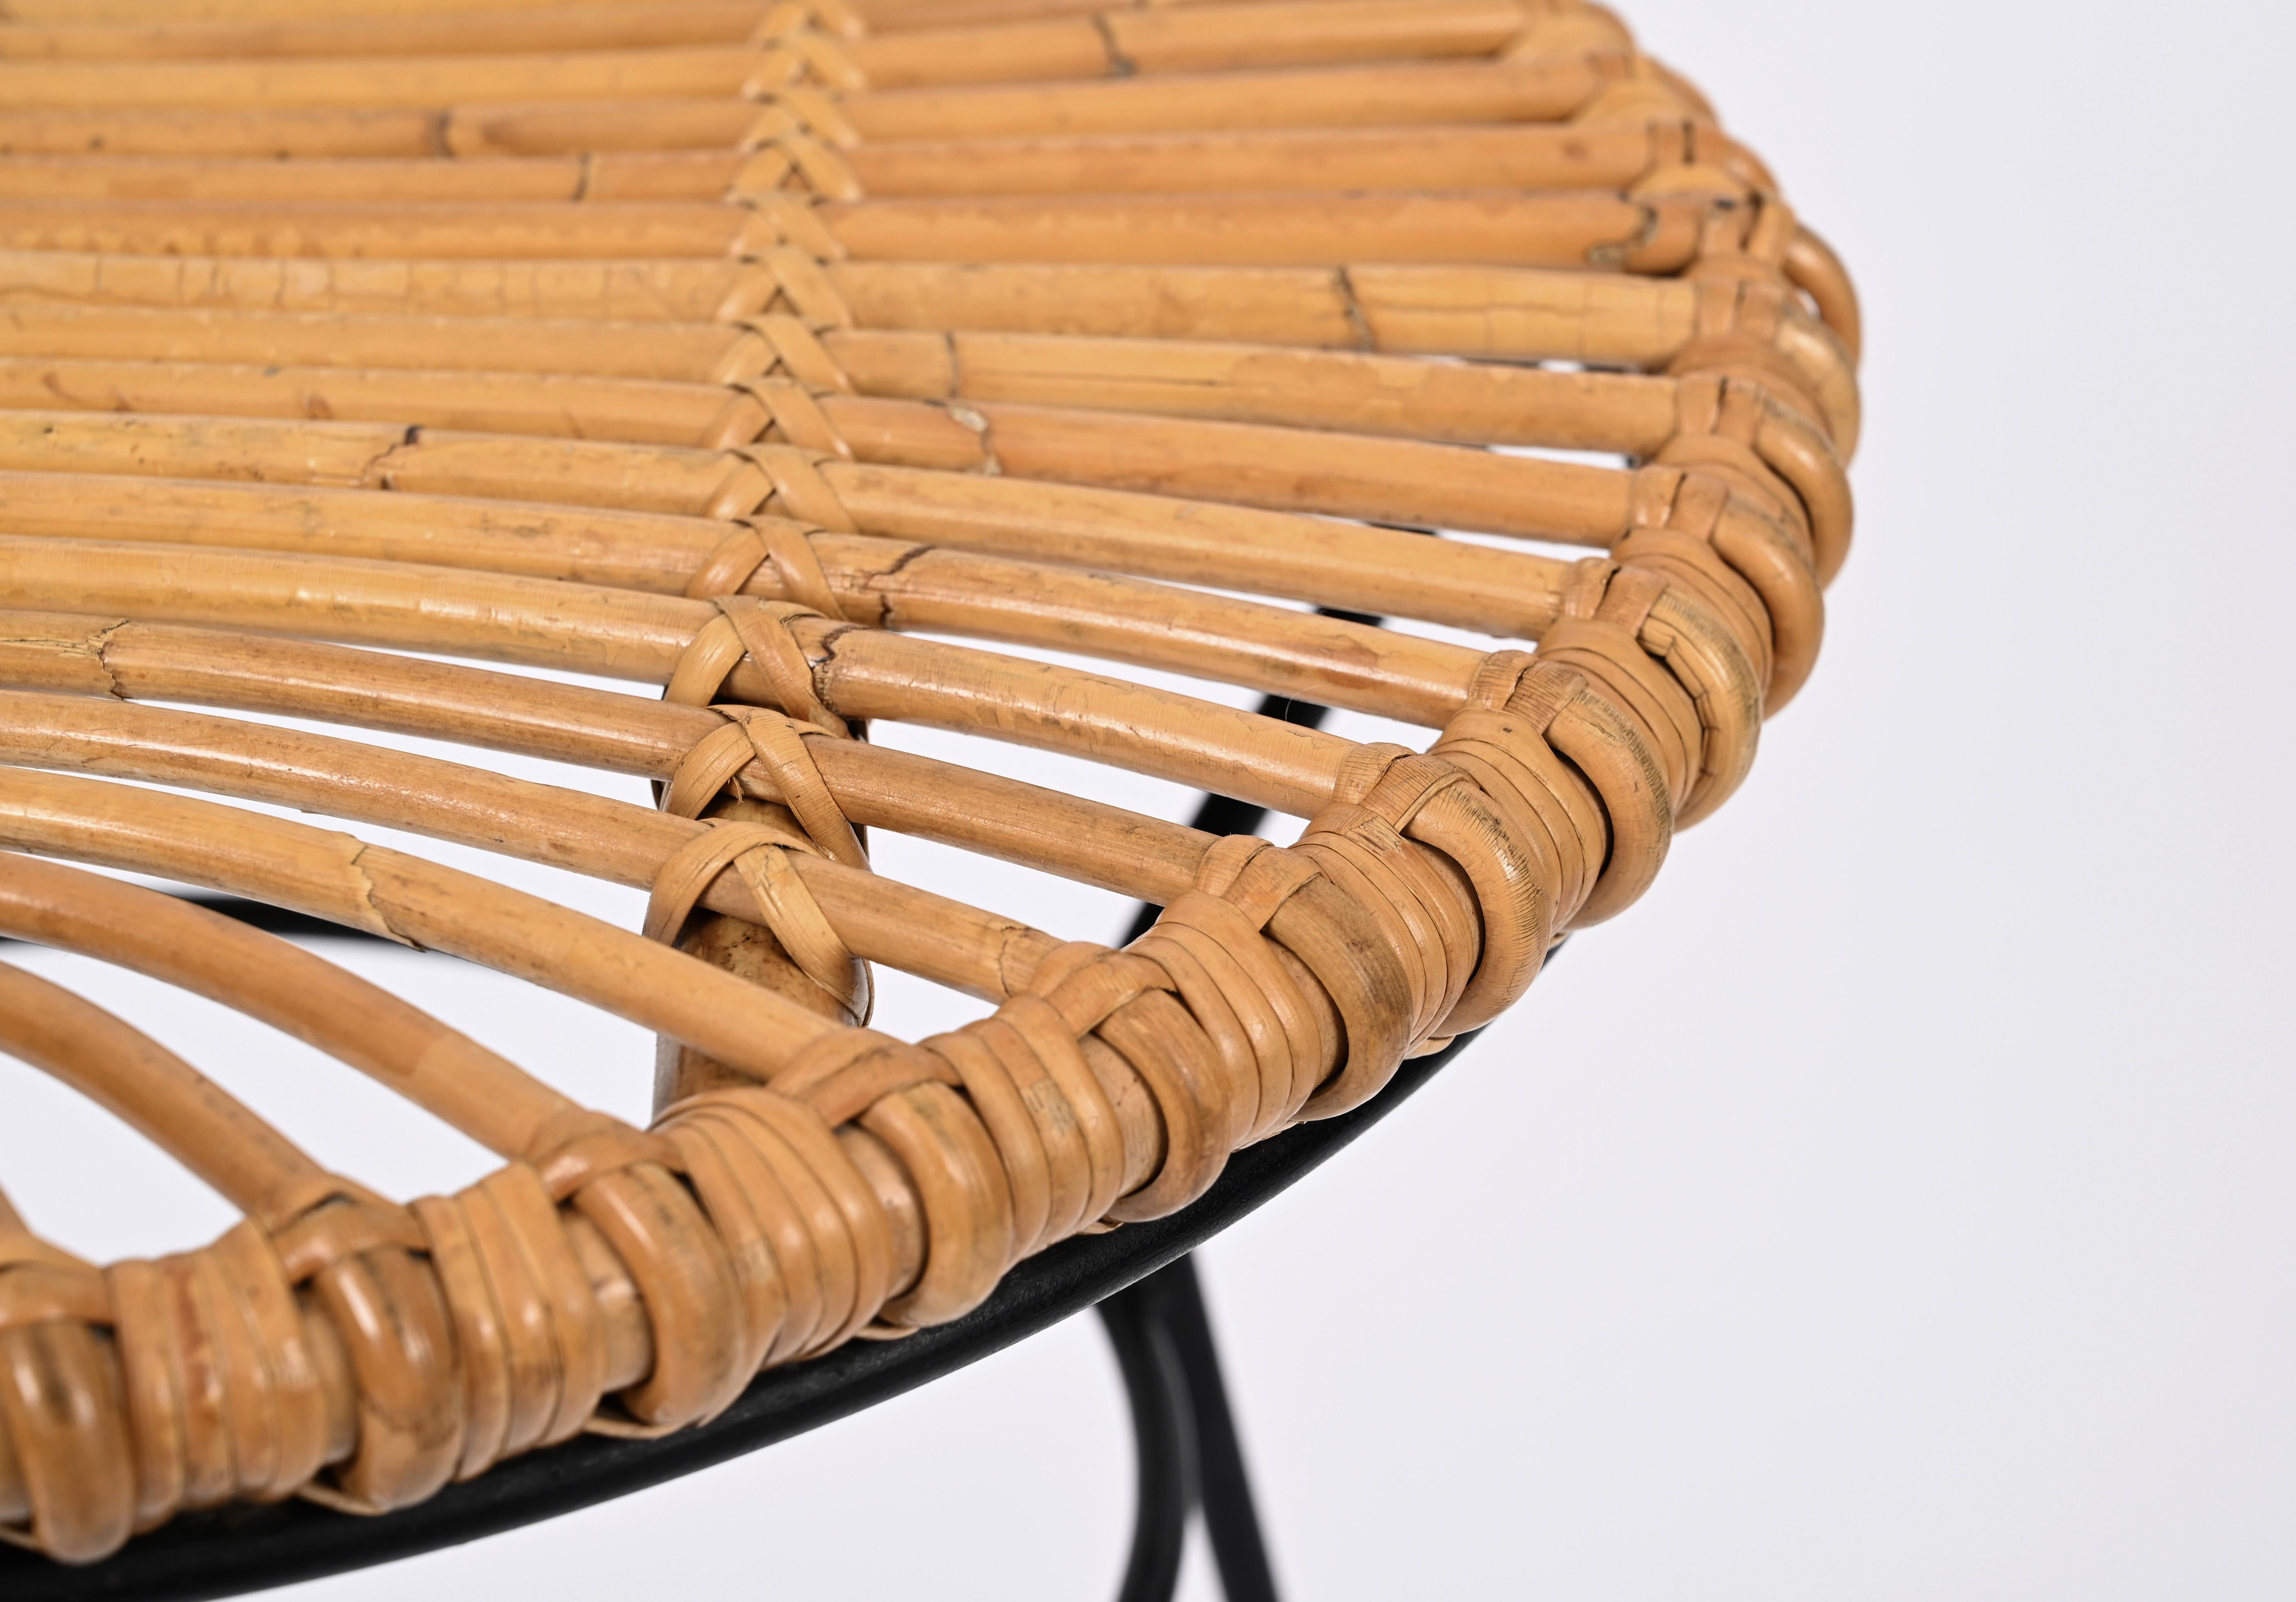 French Riviera Rattan, Wicker and Iron Coffee Table, Roberto Mango, Italy 1960s For Sale 1